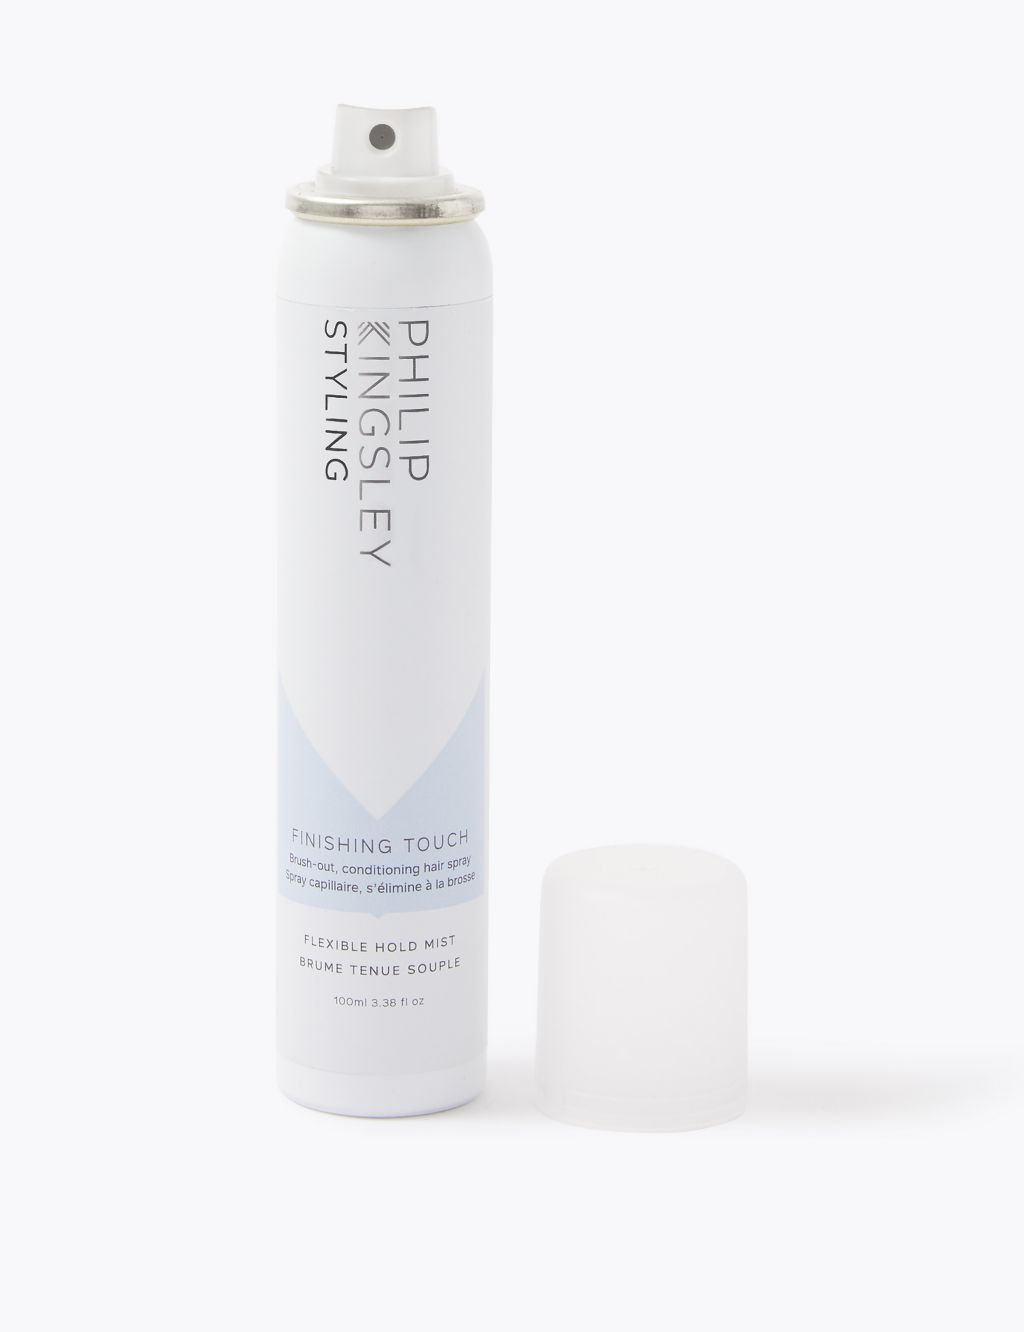 Finishing Touch (Flexible Hold) Mist 100ml